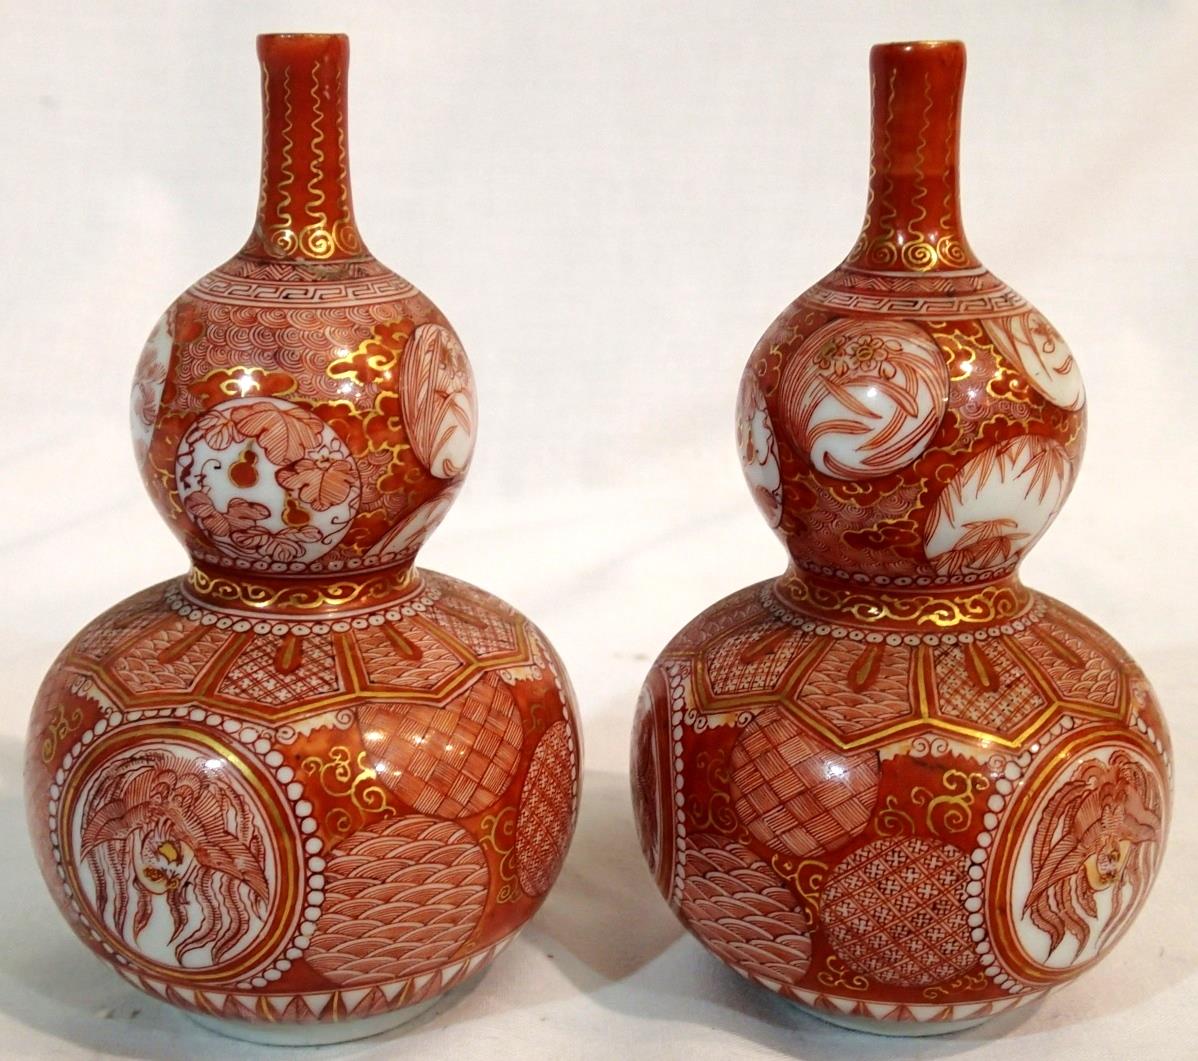 Pair of Meiji period small Japanese Kutani double gourd vases with signatures to base, each H: 11